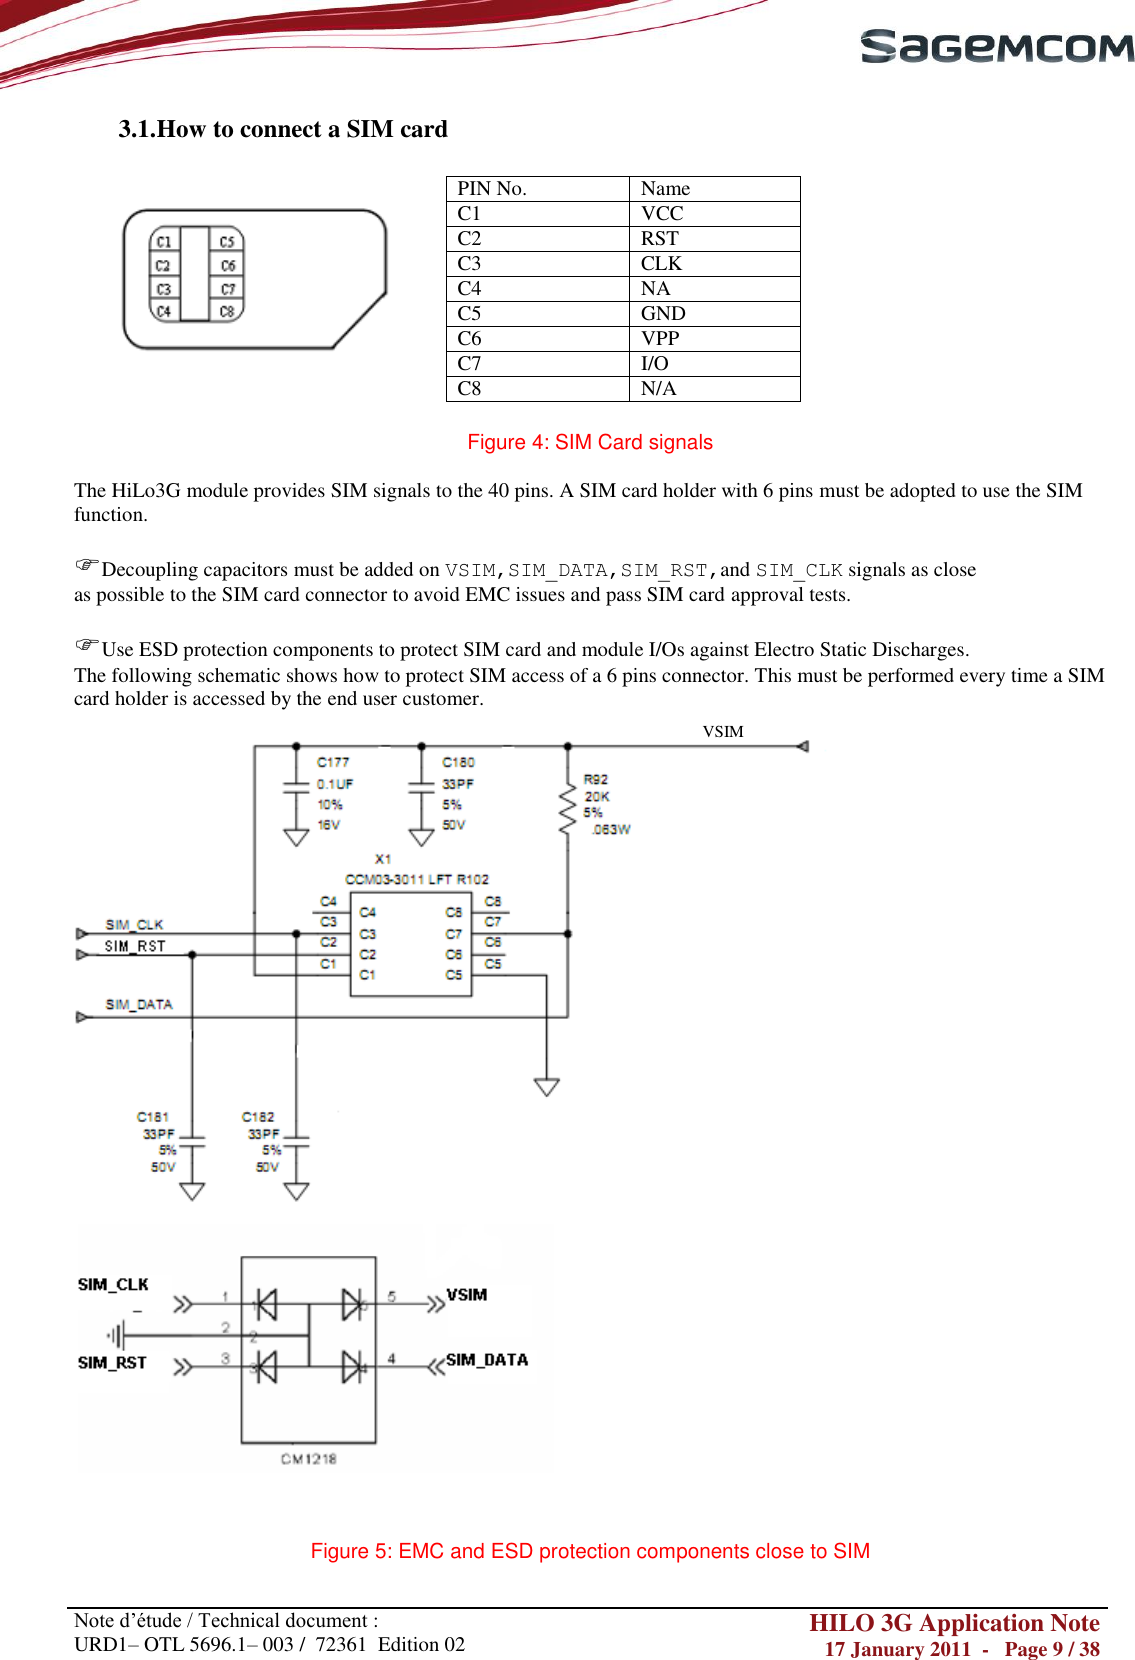       Note d‘étude / Technical document : URD1– OTL 5696.1– 003 /  72361  Edition 02 HILO 3G Application Note 17 January 2011  -   Page 9 / 38    3.1. How to connect a SIM card                  Figure 4: SIM Card signals  The HiLo3G module provides SIM signals to the 40 pins. A SIM card holder with 6 pins must be adopted to use the SIM function.  Decoupling capacitors must be added on VSIM,SIM_DATA,SIM_RST,and SIM_CLK signals as close as possible to the SIM card connector to avoid EMC issues and pass SIM card approval tests.  Use ESD protection components to protect SIM card and module I/Os against Electro Static Discharges. The following schematic shows how to protect SIM access of a 6 pins connector. This must be performed every time a SIM card holder is accessed by the end user customer.   Figure 5: EMC and ESD protection components close to SIM PIN No. Name C1 VCC C2 RST C3 CLK C4 NA C5 GND C6 VPP C7 I/O C8 N/A VSIM 